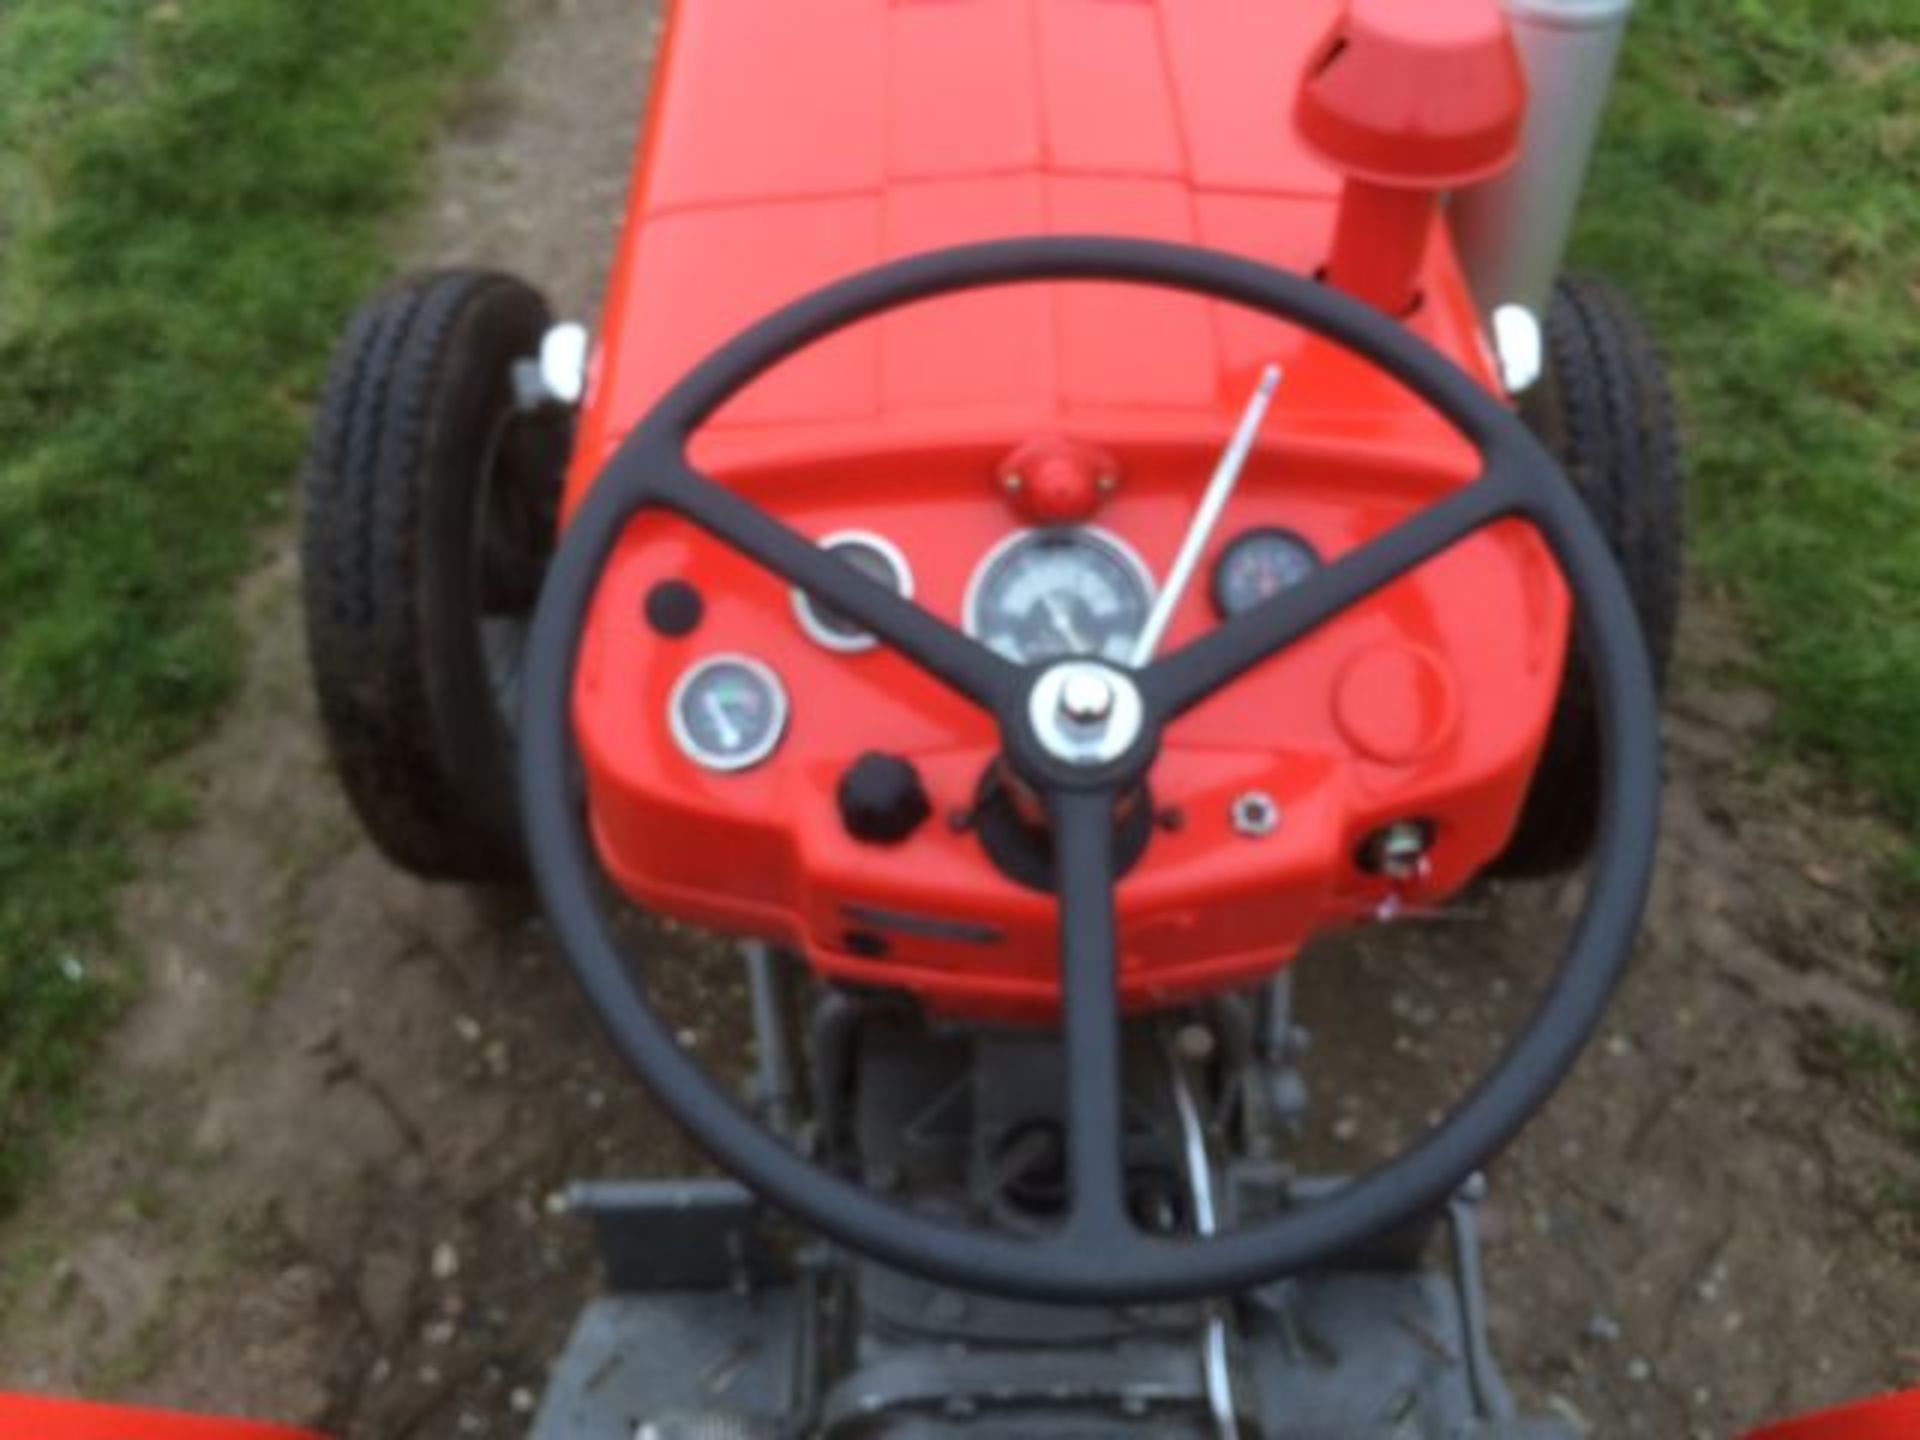 MASSEY FERGUSON Age unknown production ran between 1965 and 1975 this example shows 4107 hours - Image 3 of 10